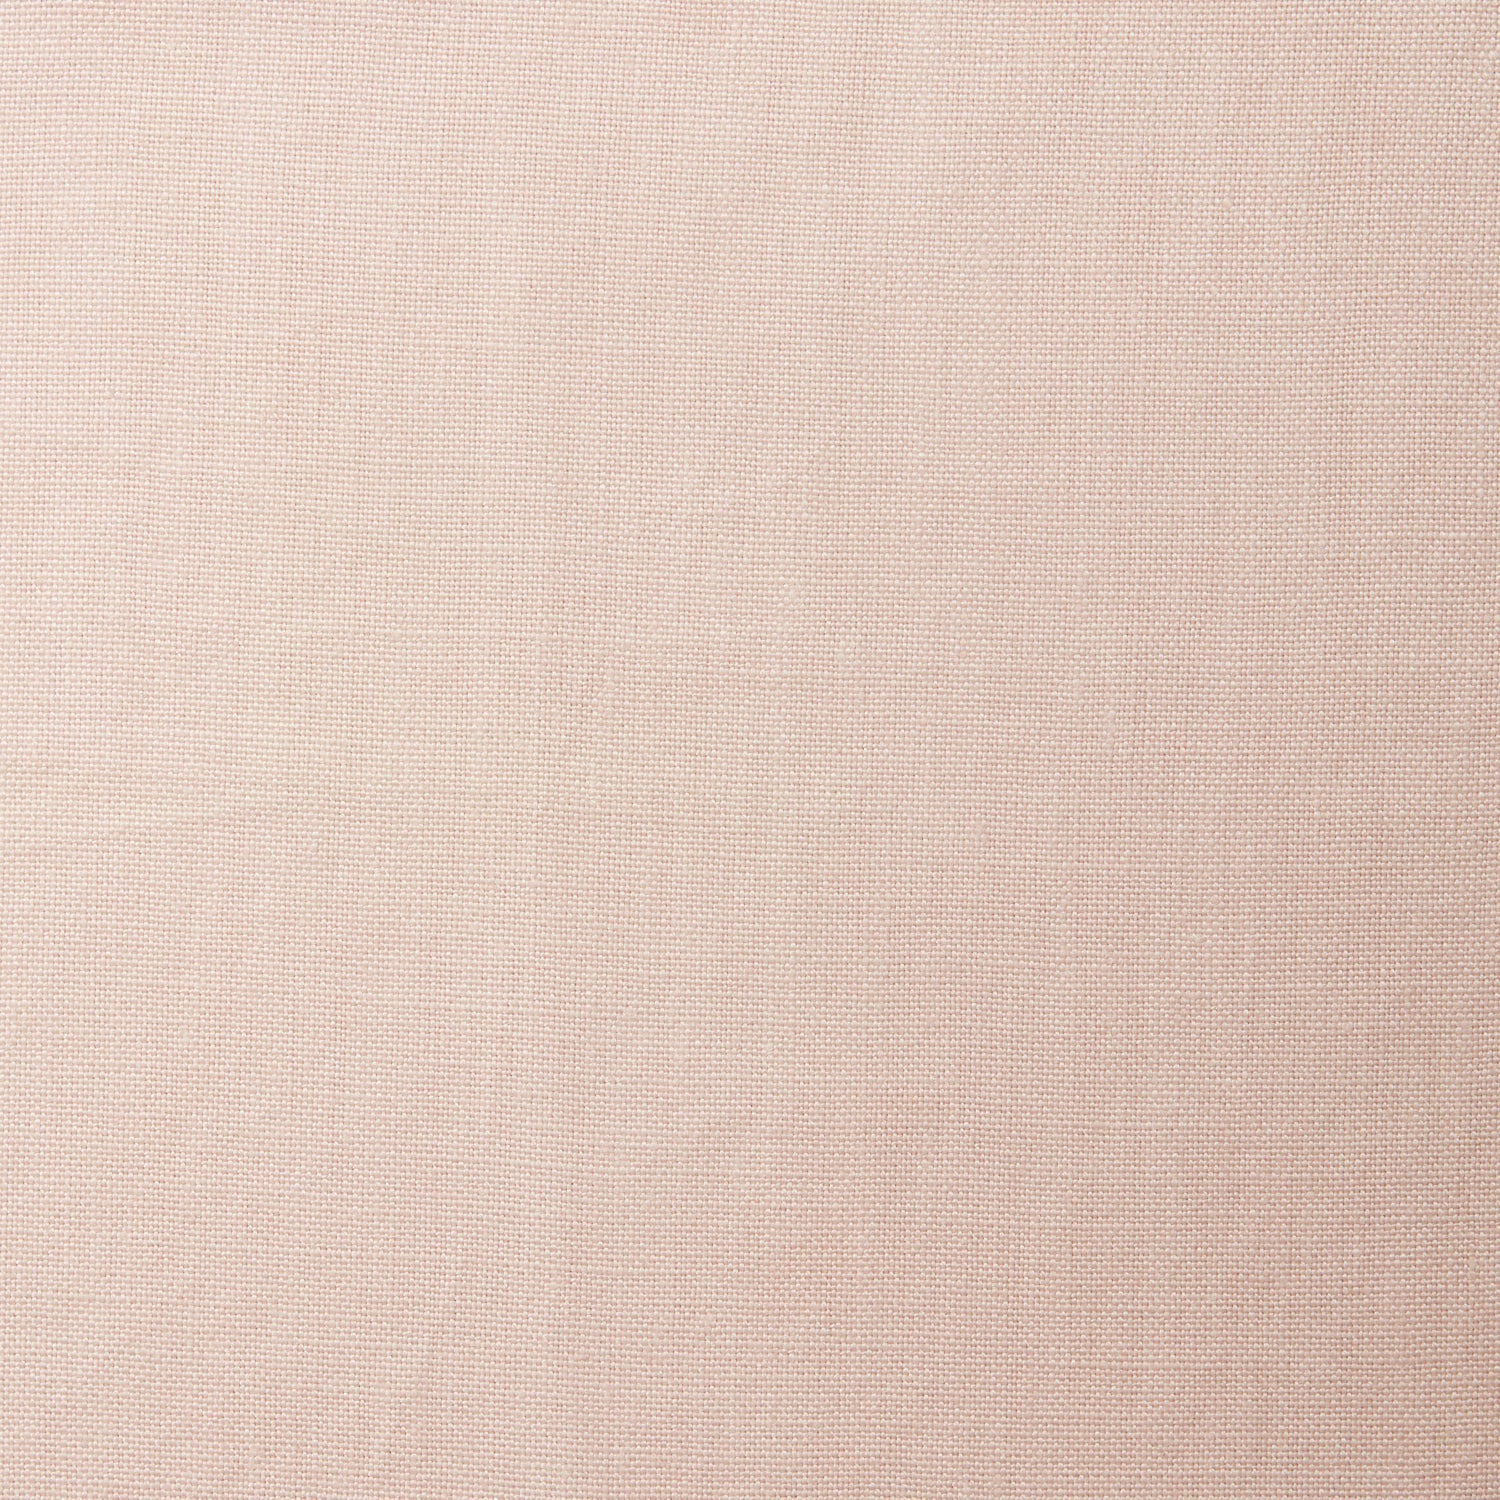 A swatch of blended linen fabric in a solid pale pink color.